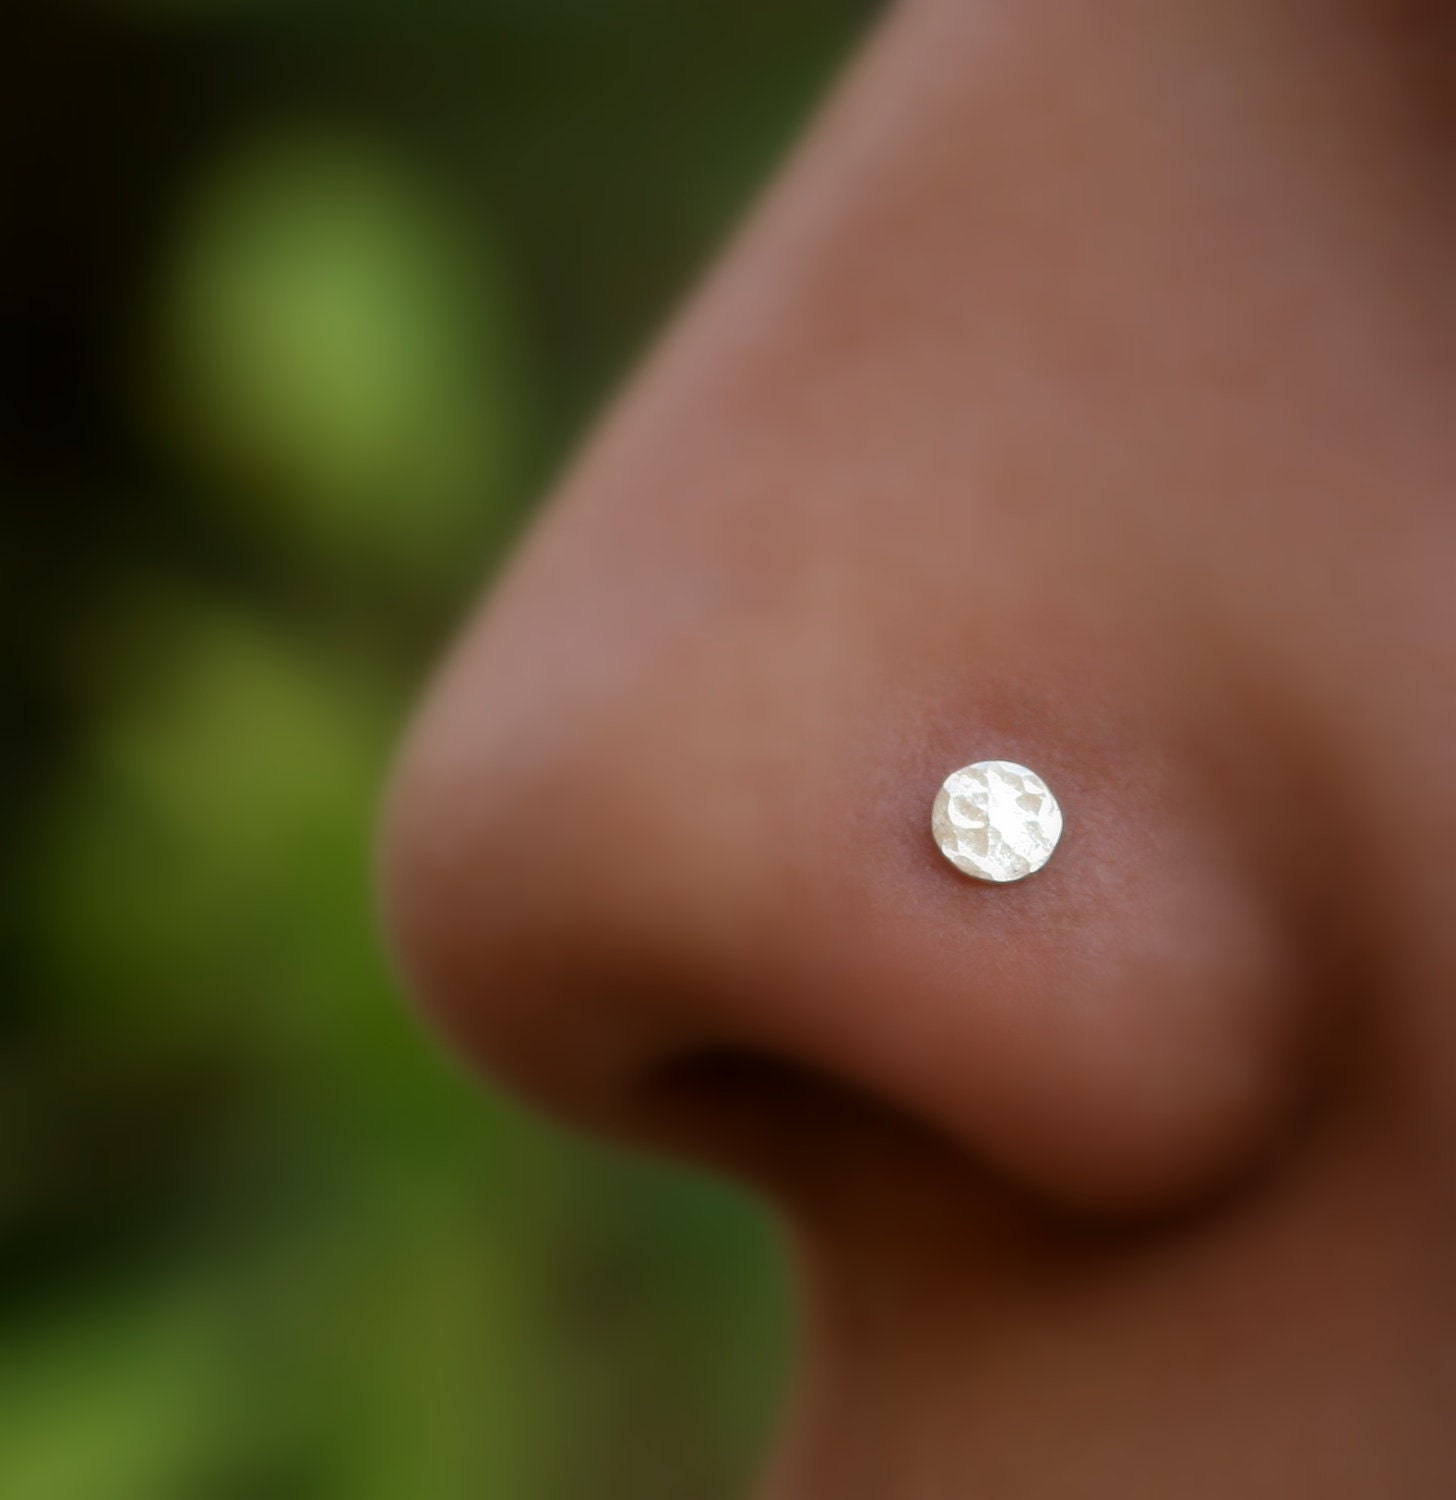 Nose Ring Stud Nose Piercing Tragus Earring Cartilage within Check out All of these nose piercing earring for your home